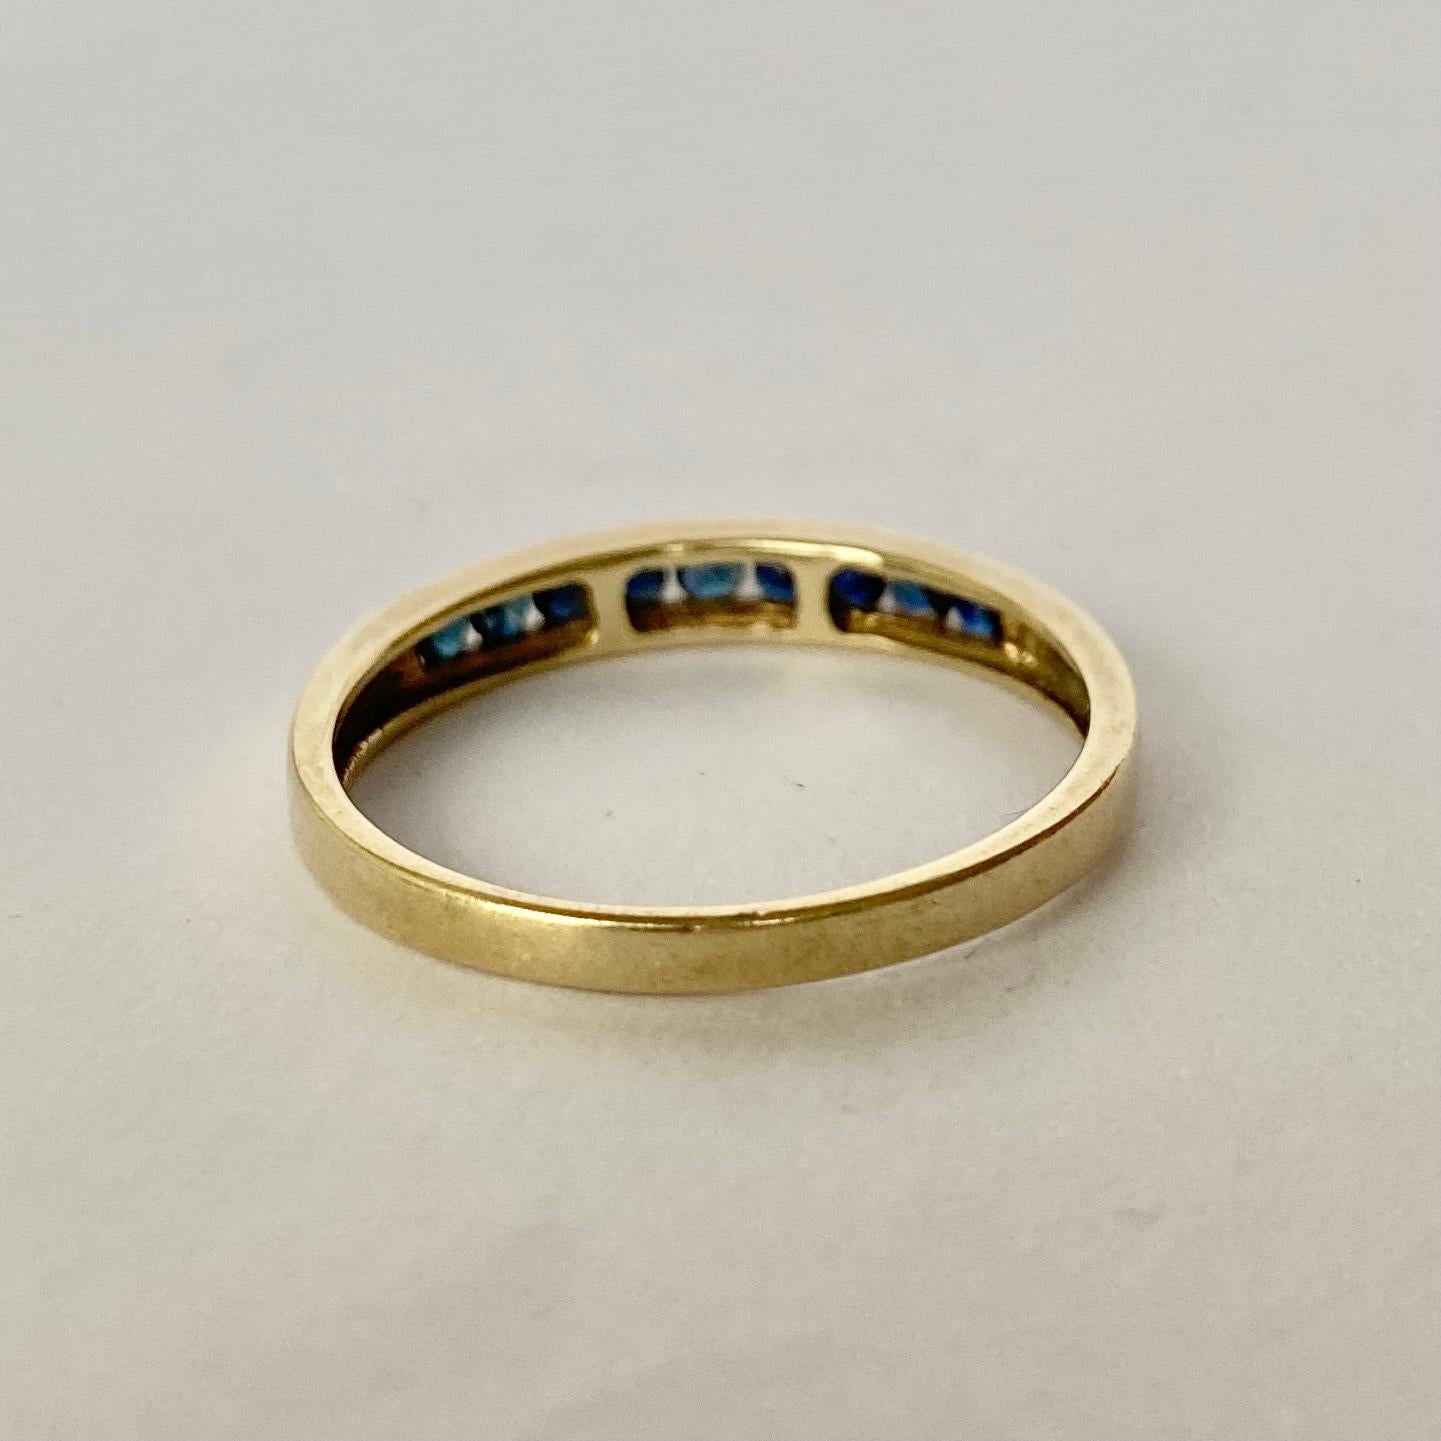 The sapphire set within this 9ct gold band are round cut and total approx 20pts. They have a great shine to them and are a gorgeous inky blue colour. 

Ring Size: T or 9 1/2 
Band Width: 3.5mm 

Weight: 1.88g